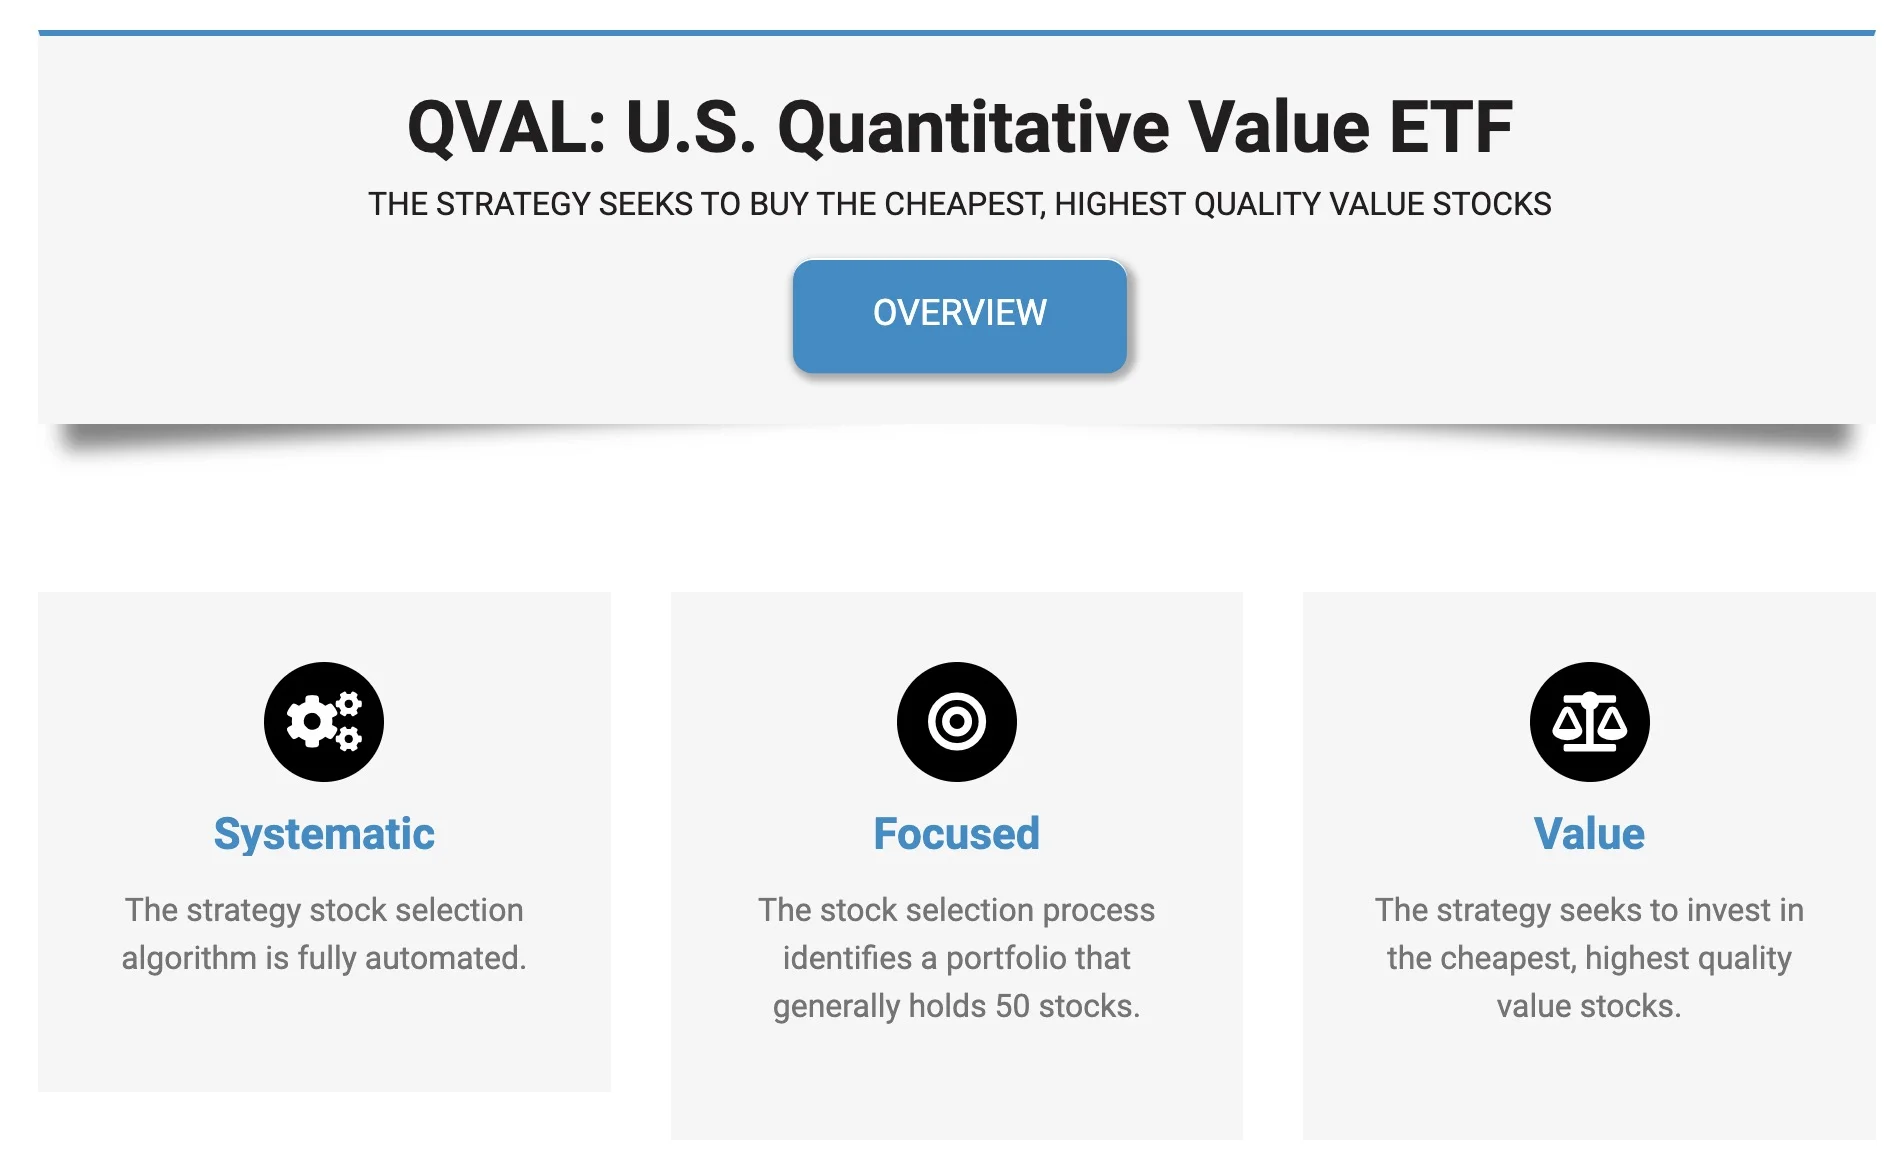 QVAL ETF is systematic, focused and value oriented. 